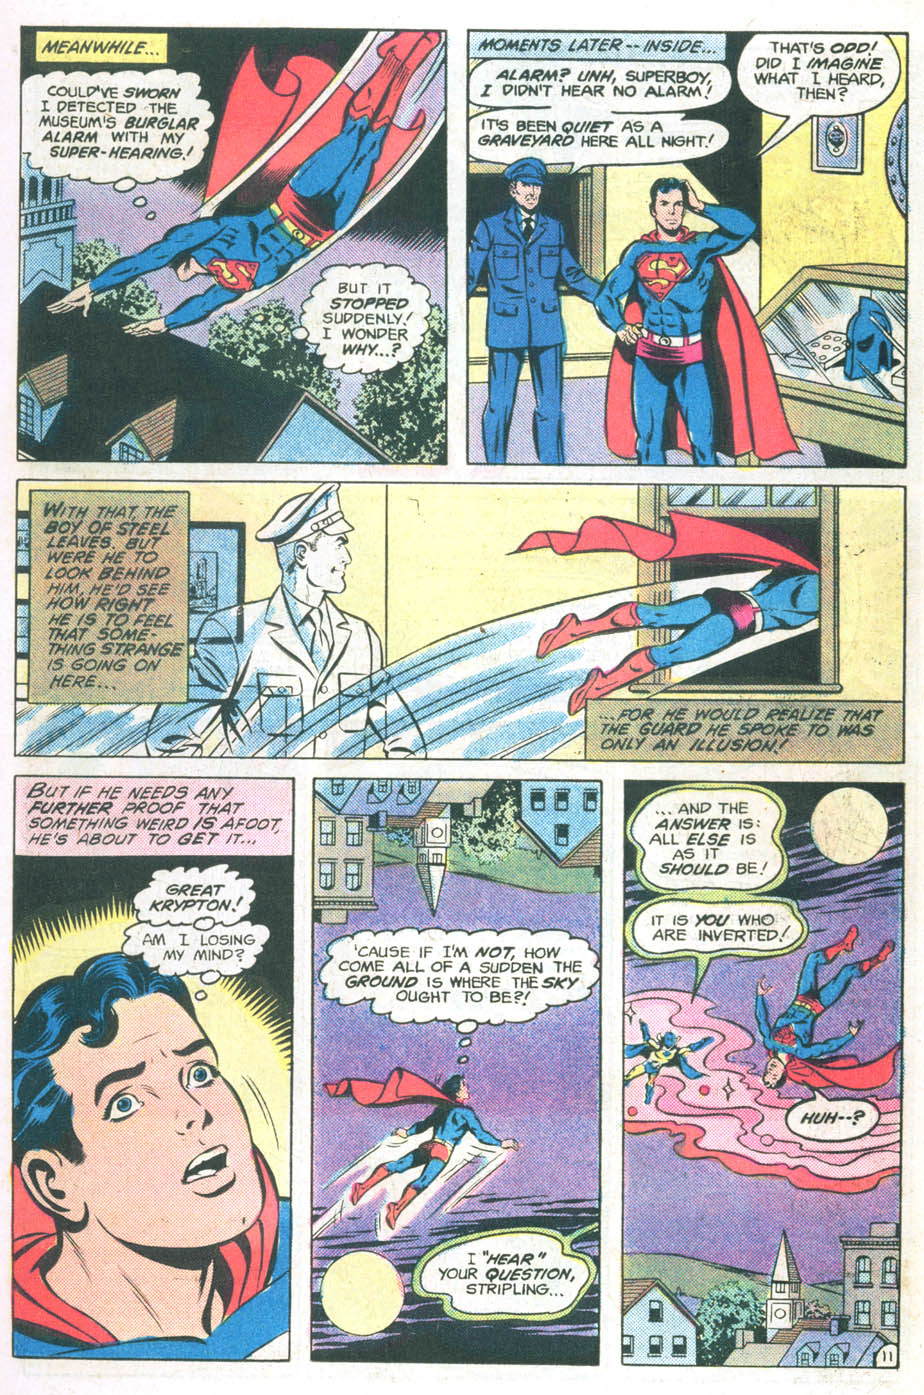 The New Adventures of Superboy 25 Page 11